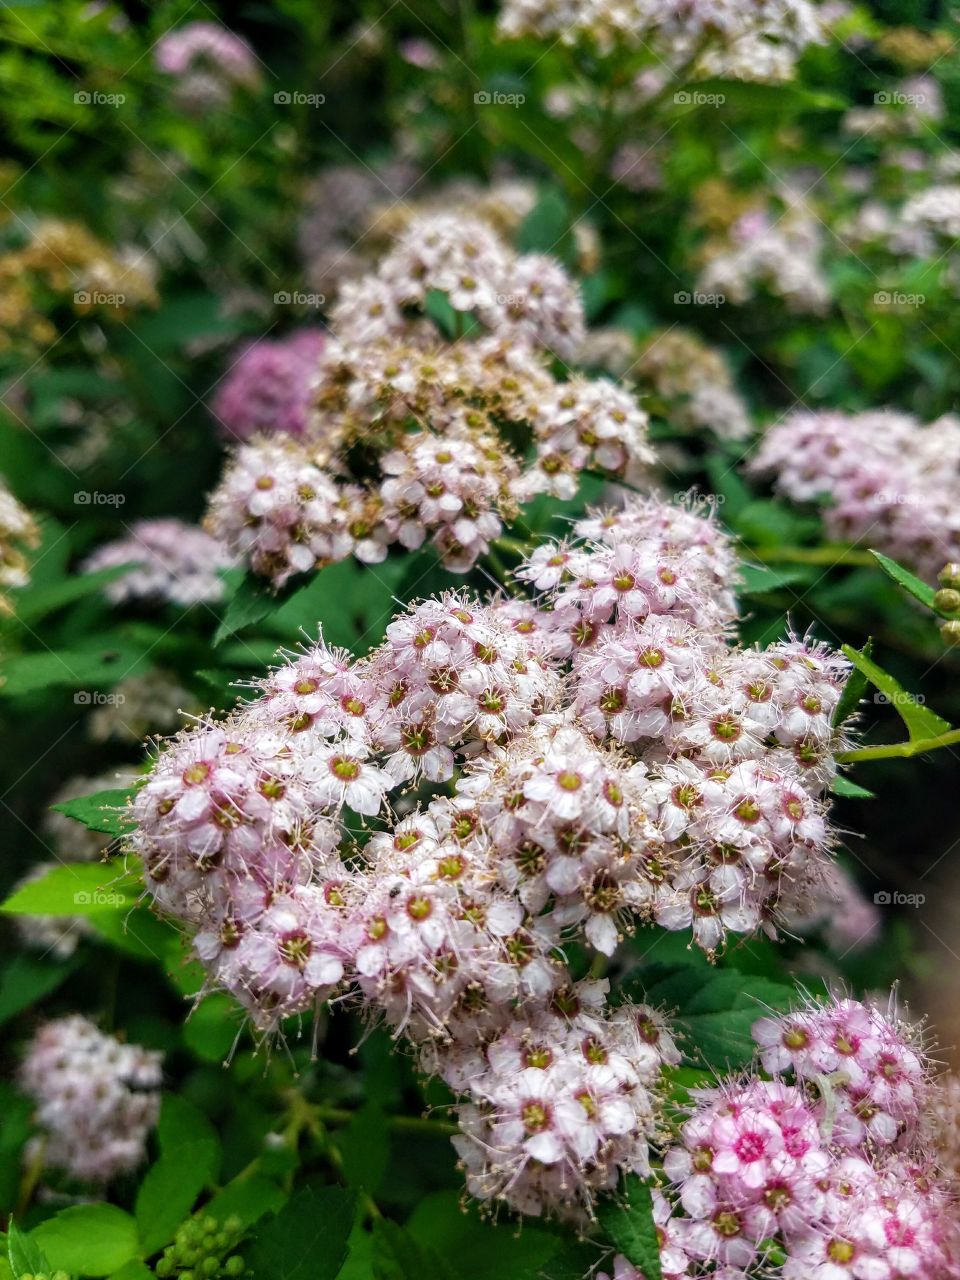 Small, pale pink flowers